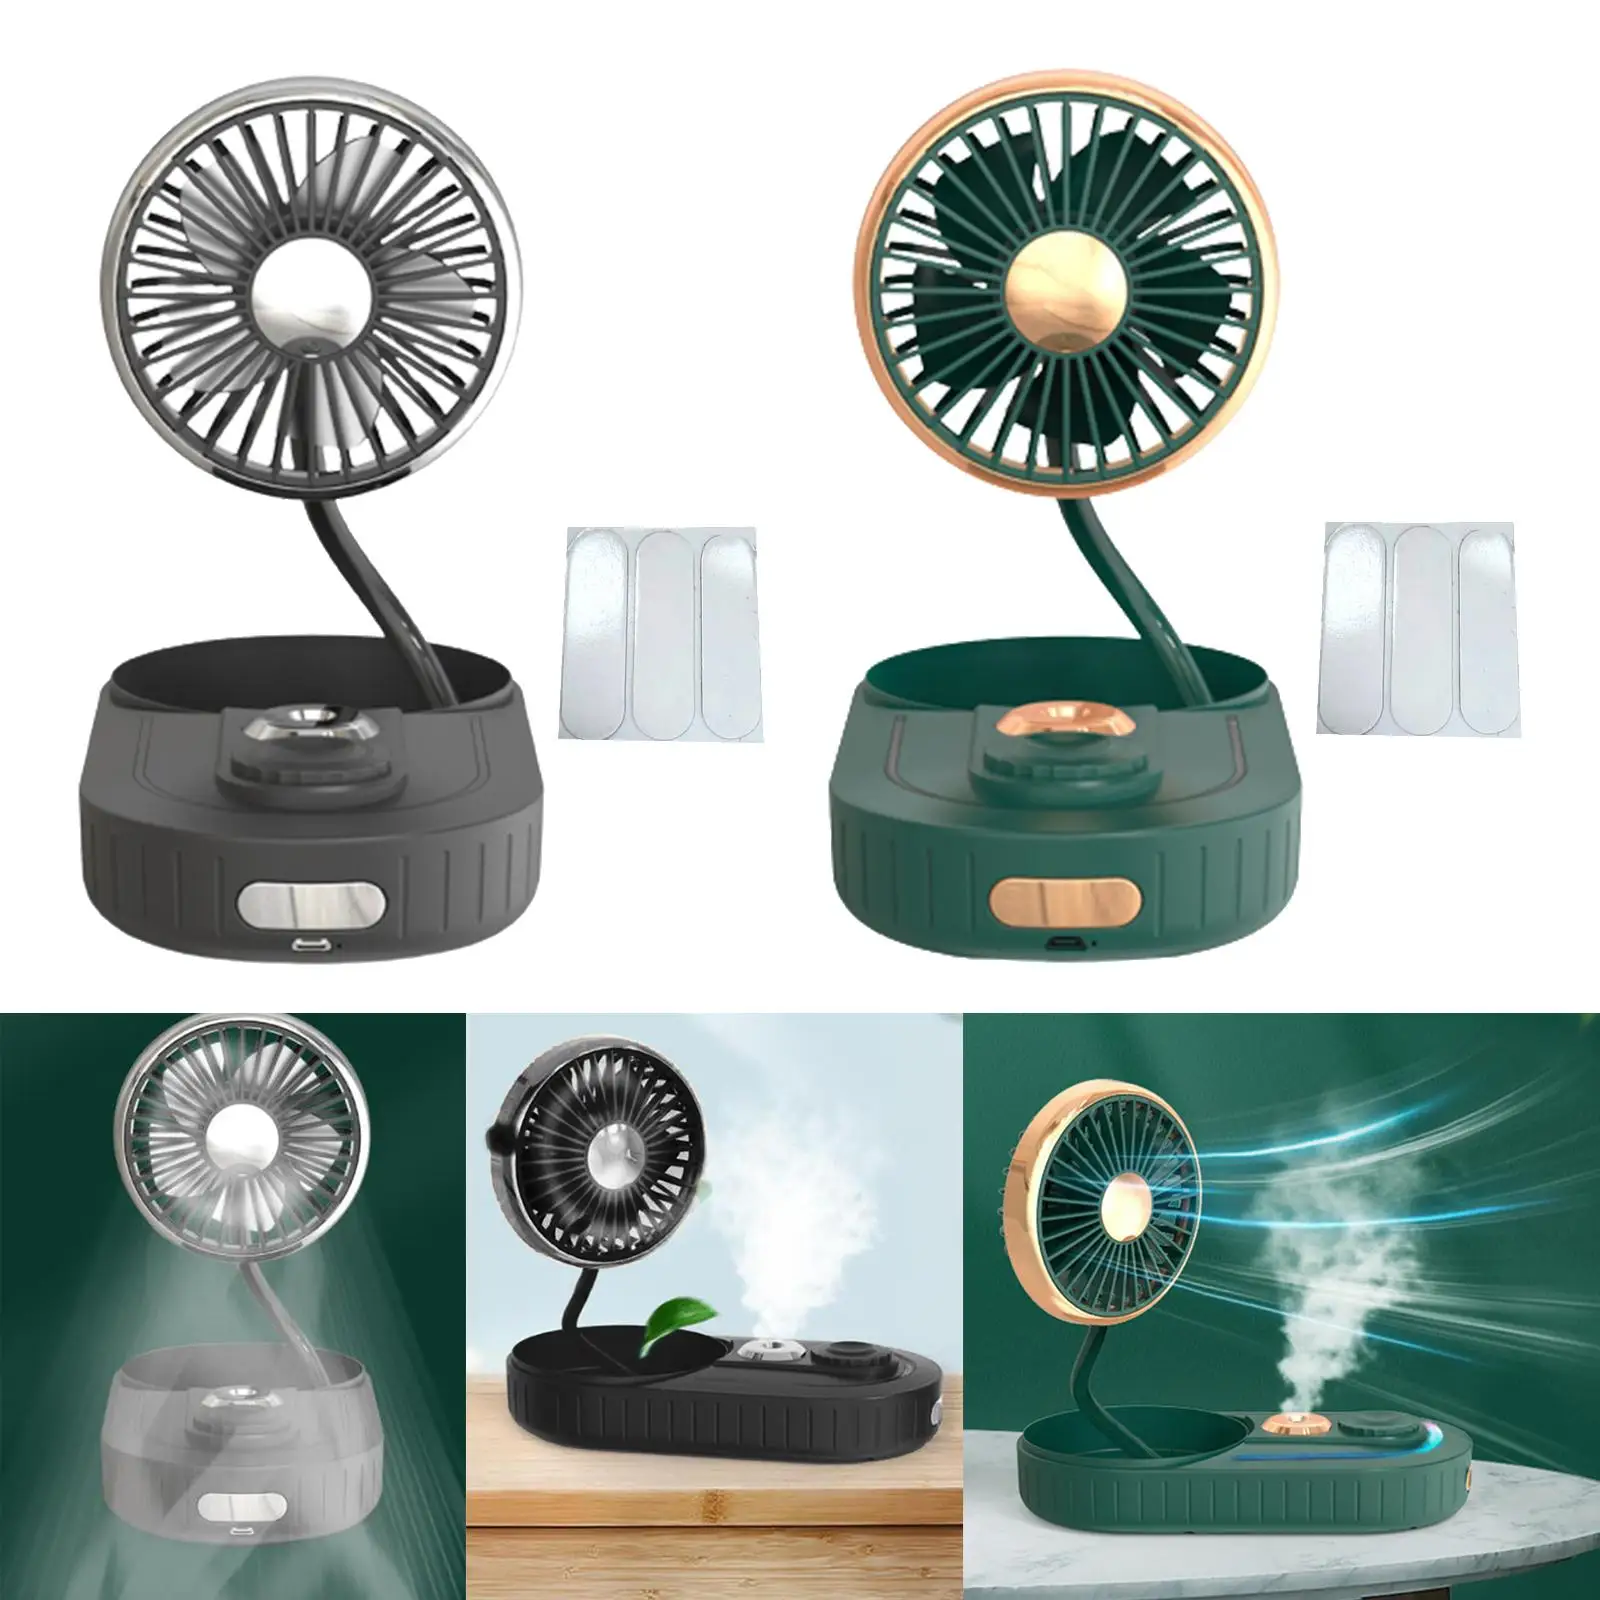 USB Fan Humidifier Dashboard with Light Adjustable Summer Fit for Desktop